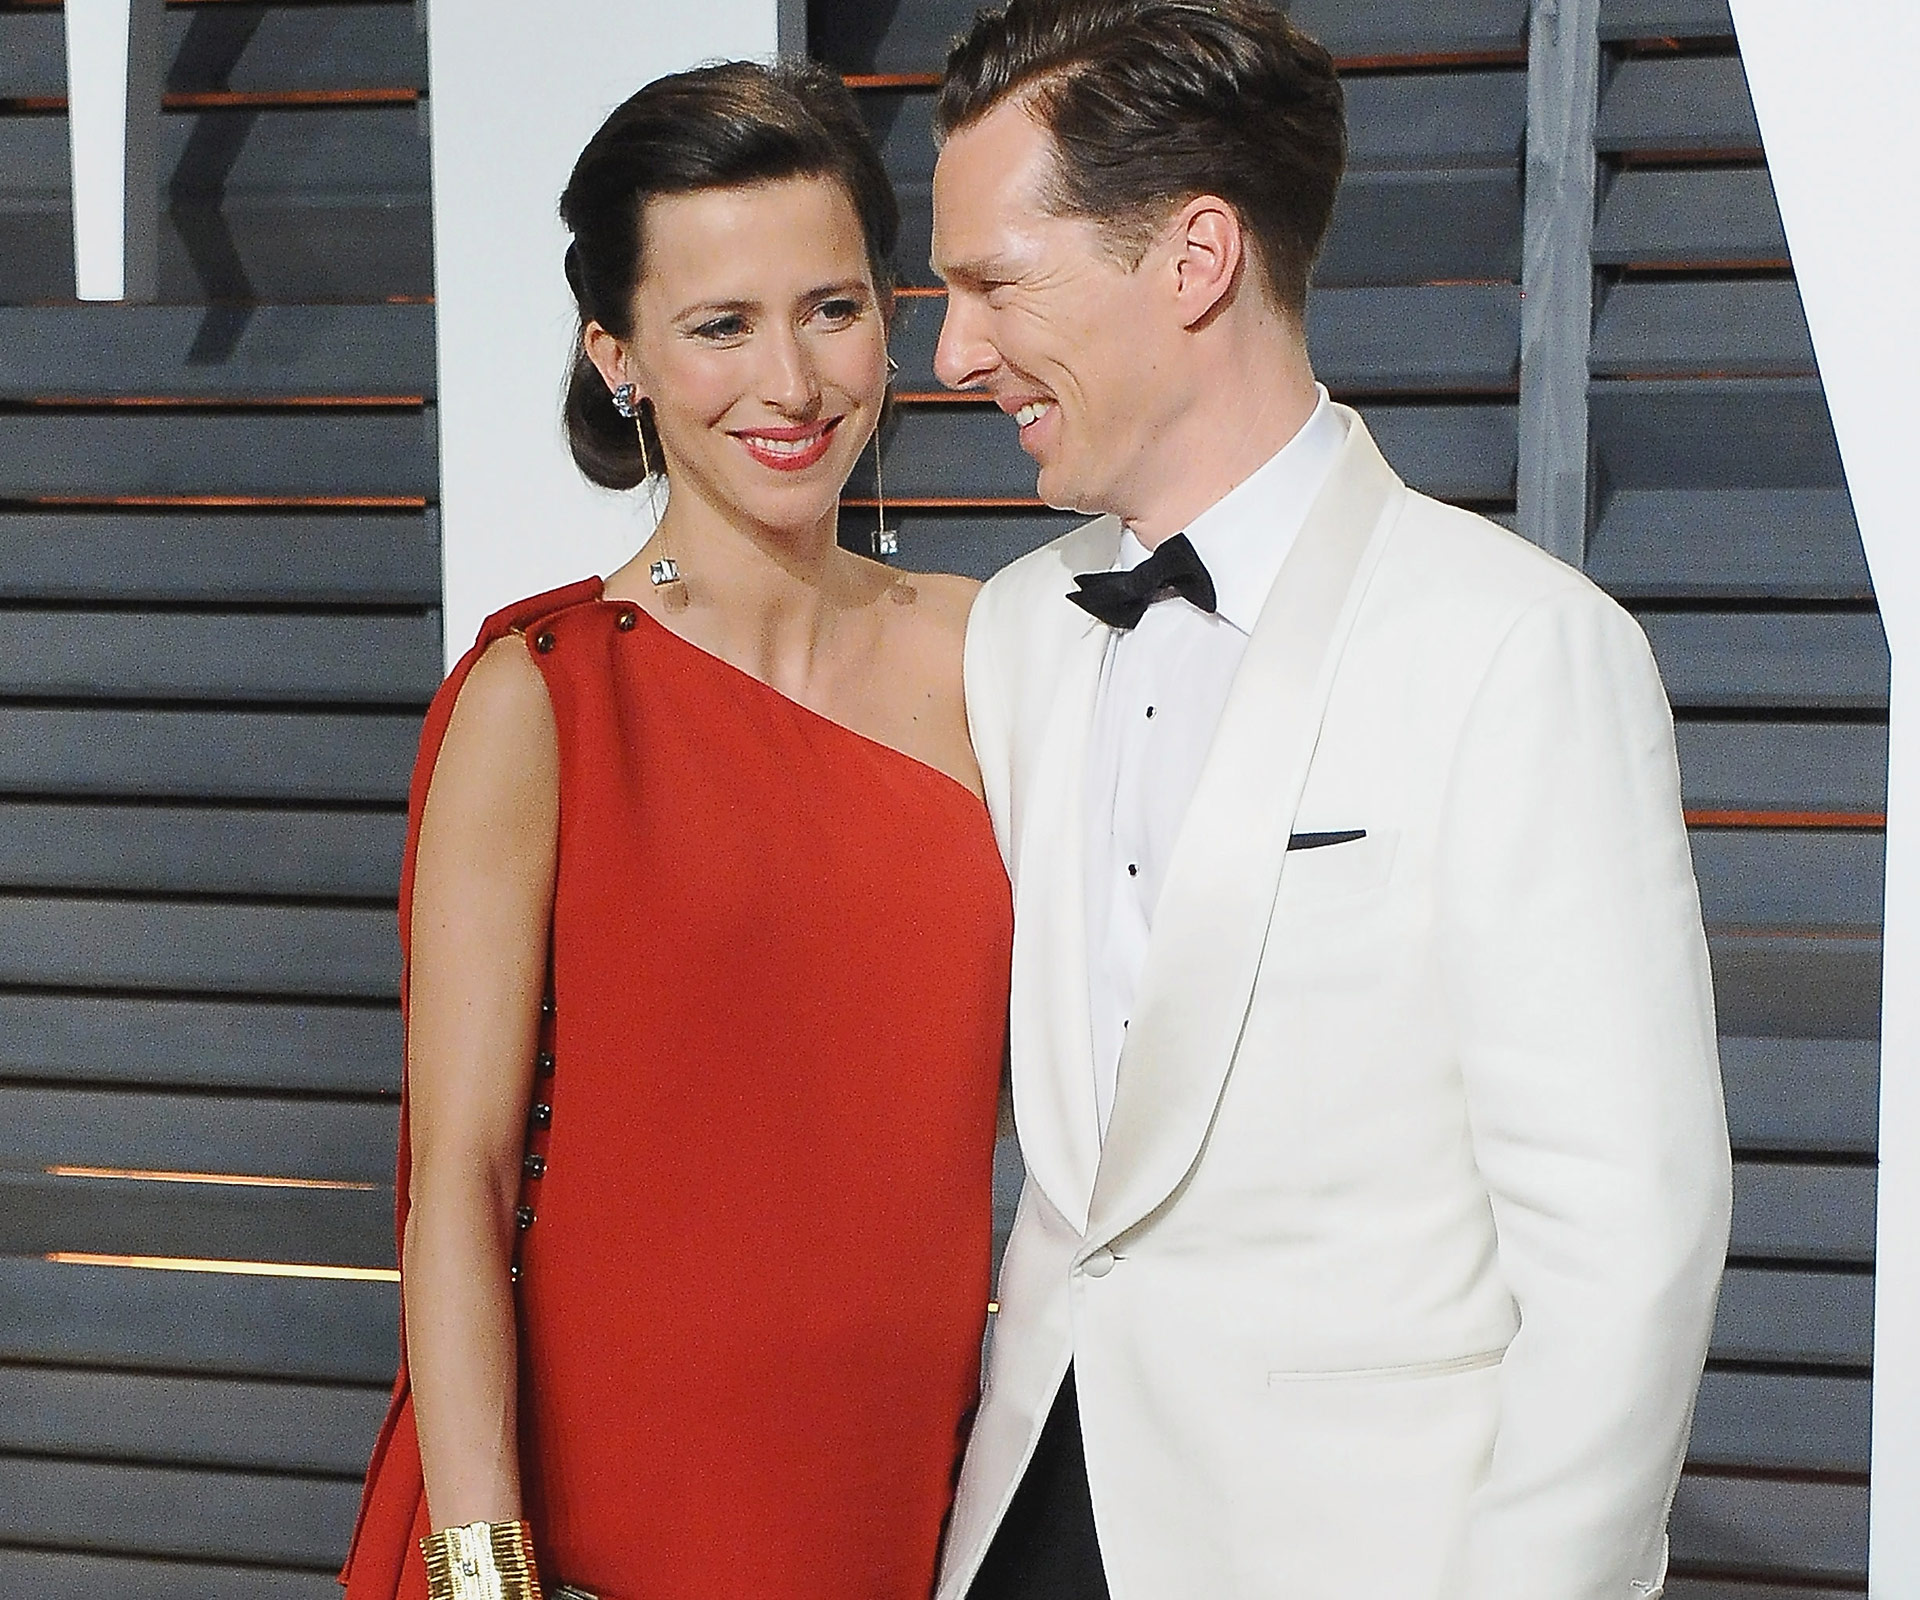 Benedict Cumberbatch and wife Sophie Hunter welcome a baby boy